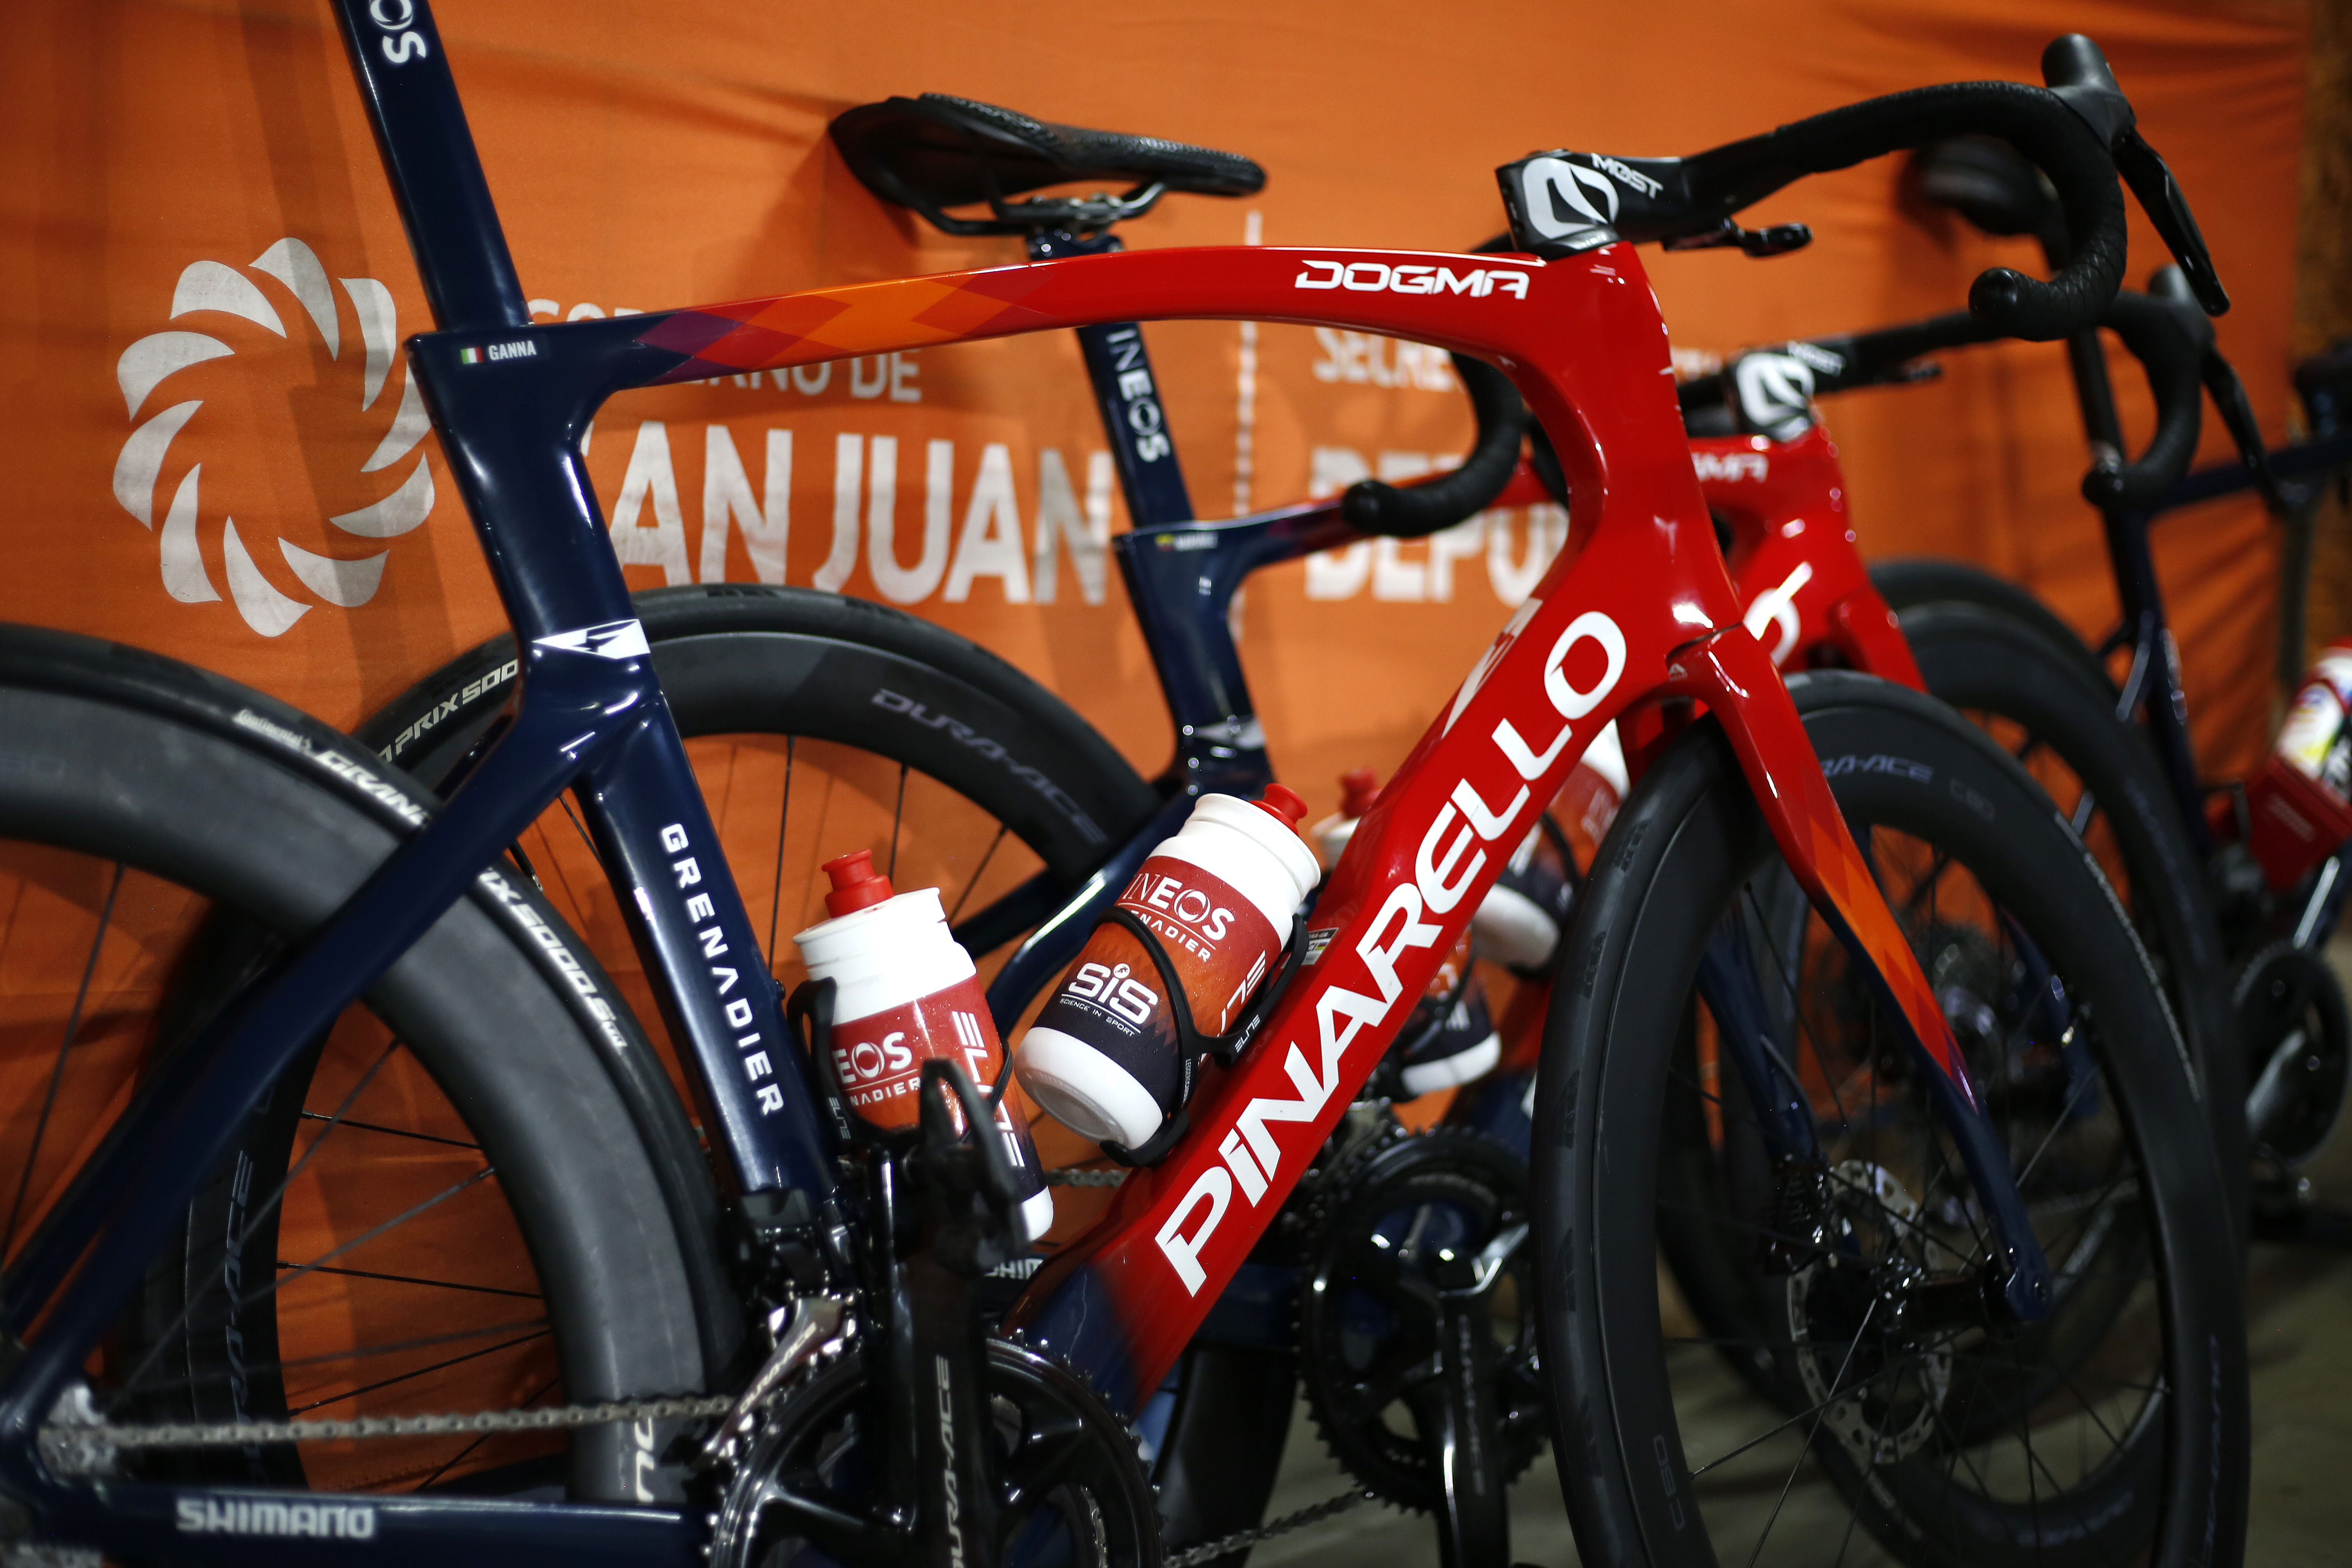 L Catterton sells its stake in Pinarello to 'private family office' - News  - BikeBiz